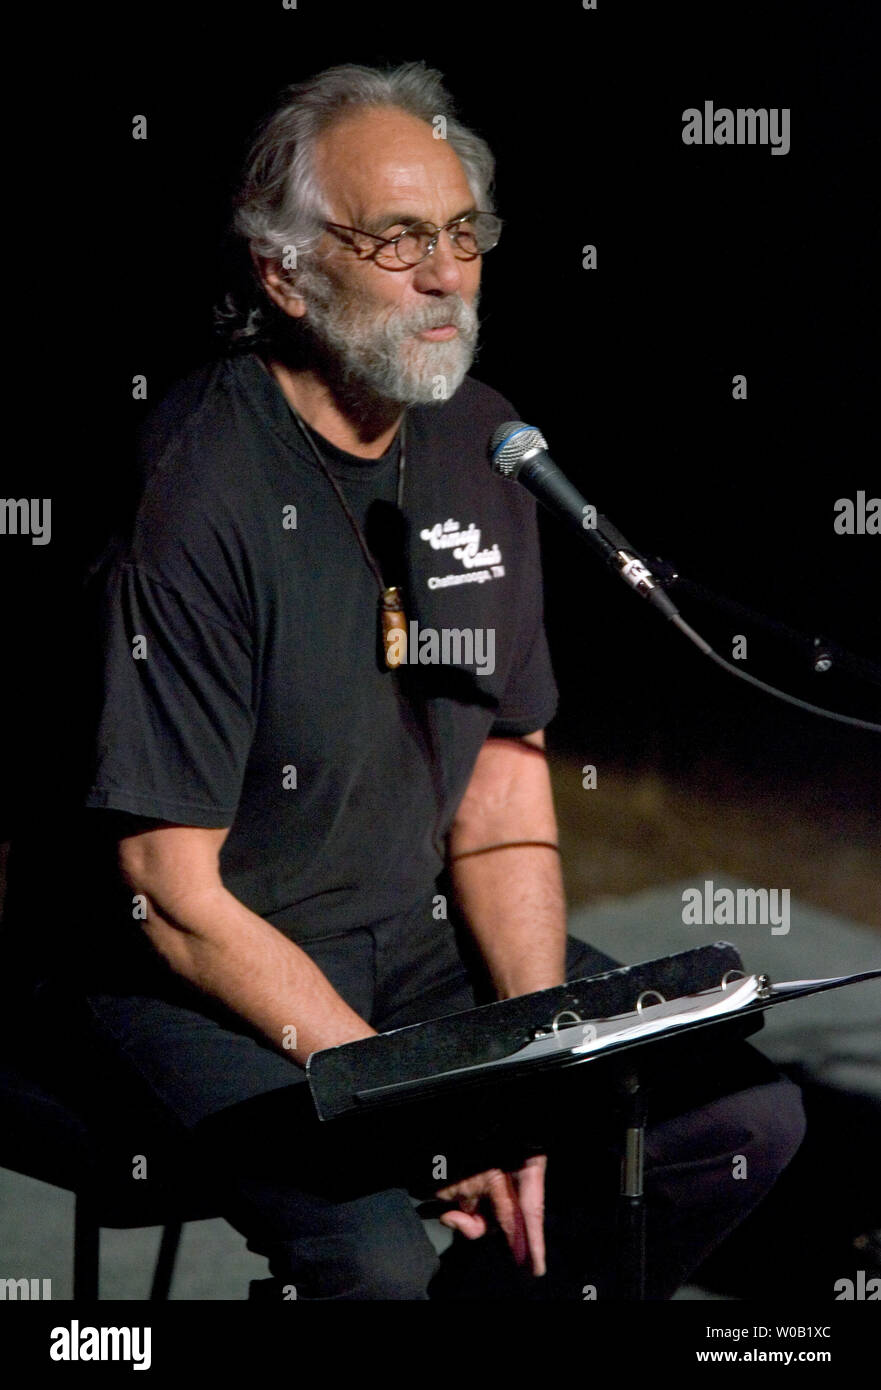 Tommy Chong stars in the popular Broadway play 'The Marijuana-Logues' opening it's North America Tour with two shows at Vancouver's Orpheum Theater, February 18, 2005. This is the first gig for 65 year-old Chong after his July release from prison where he served nine months upon pleading guilty to selling drug paraphenalia after being caught up in law enforcements 'operation pipe dreams.'   (UPI Photo / Heinz Ruckemann) Stock Photo